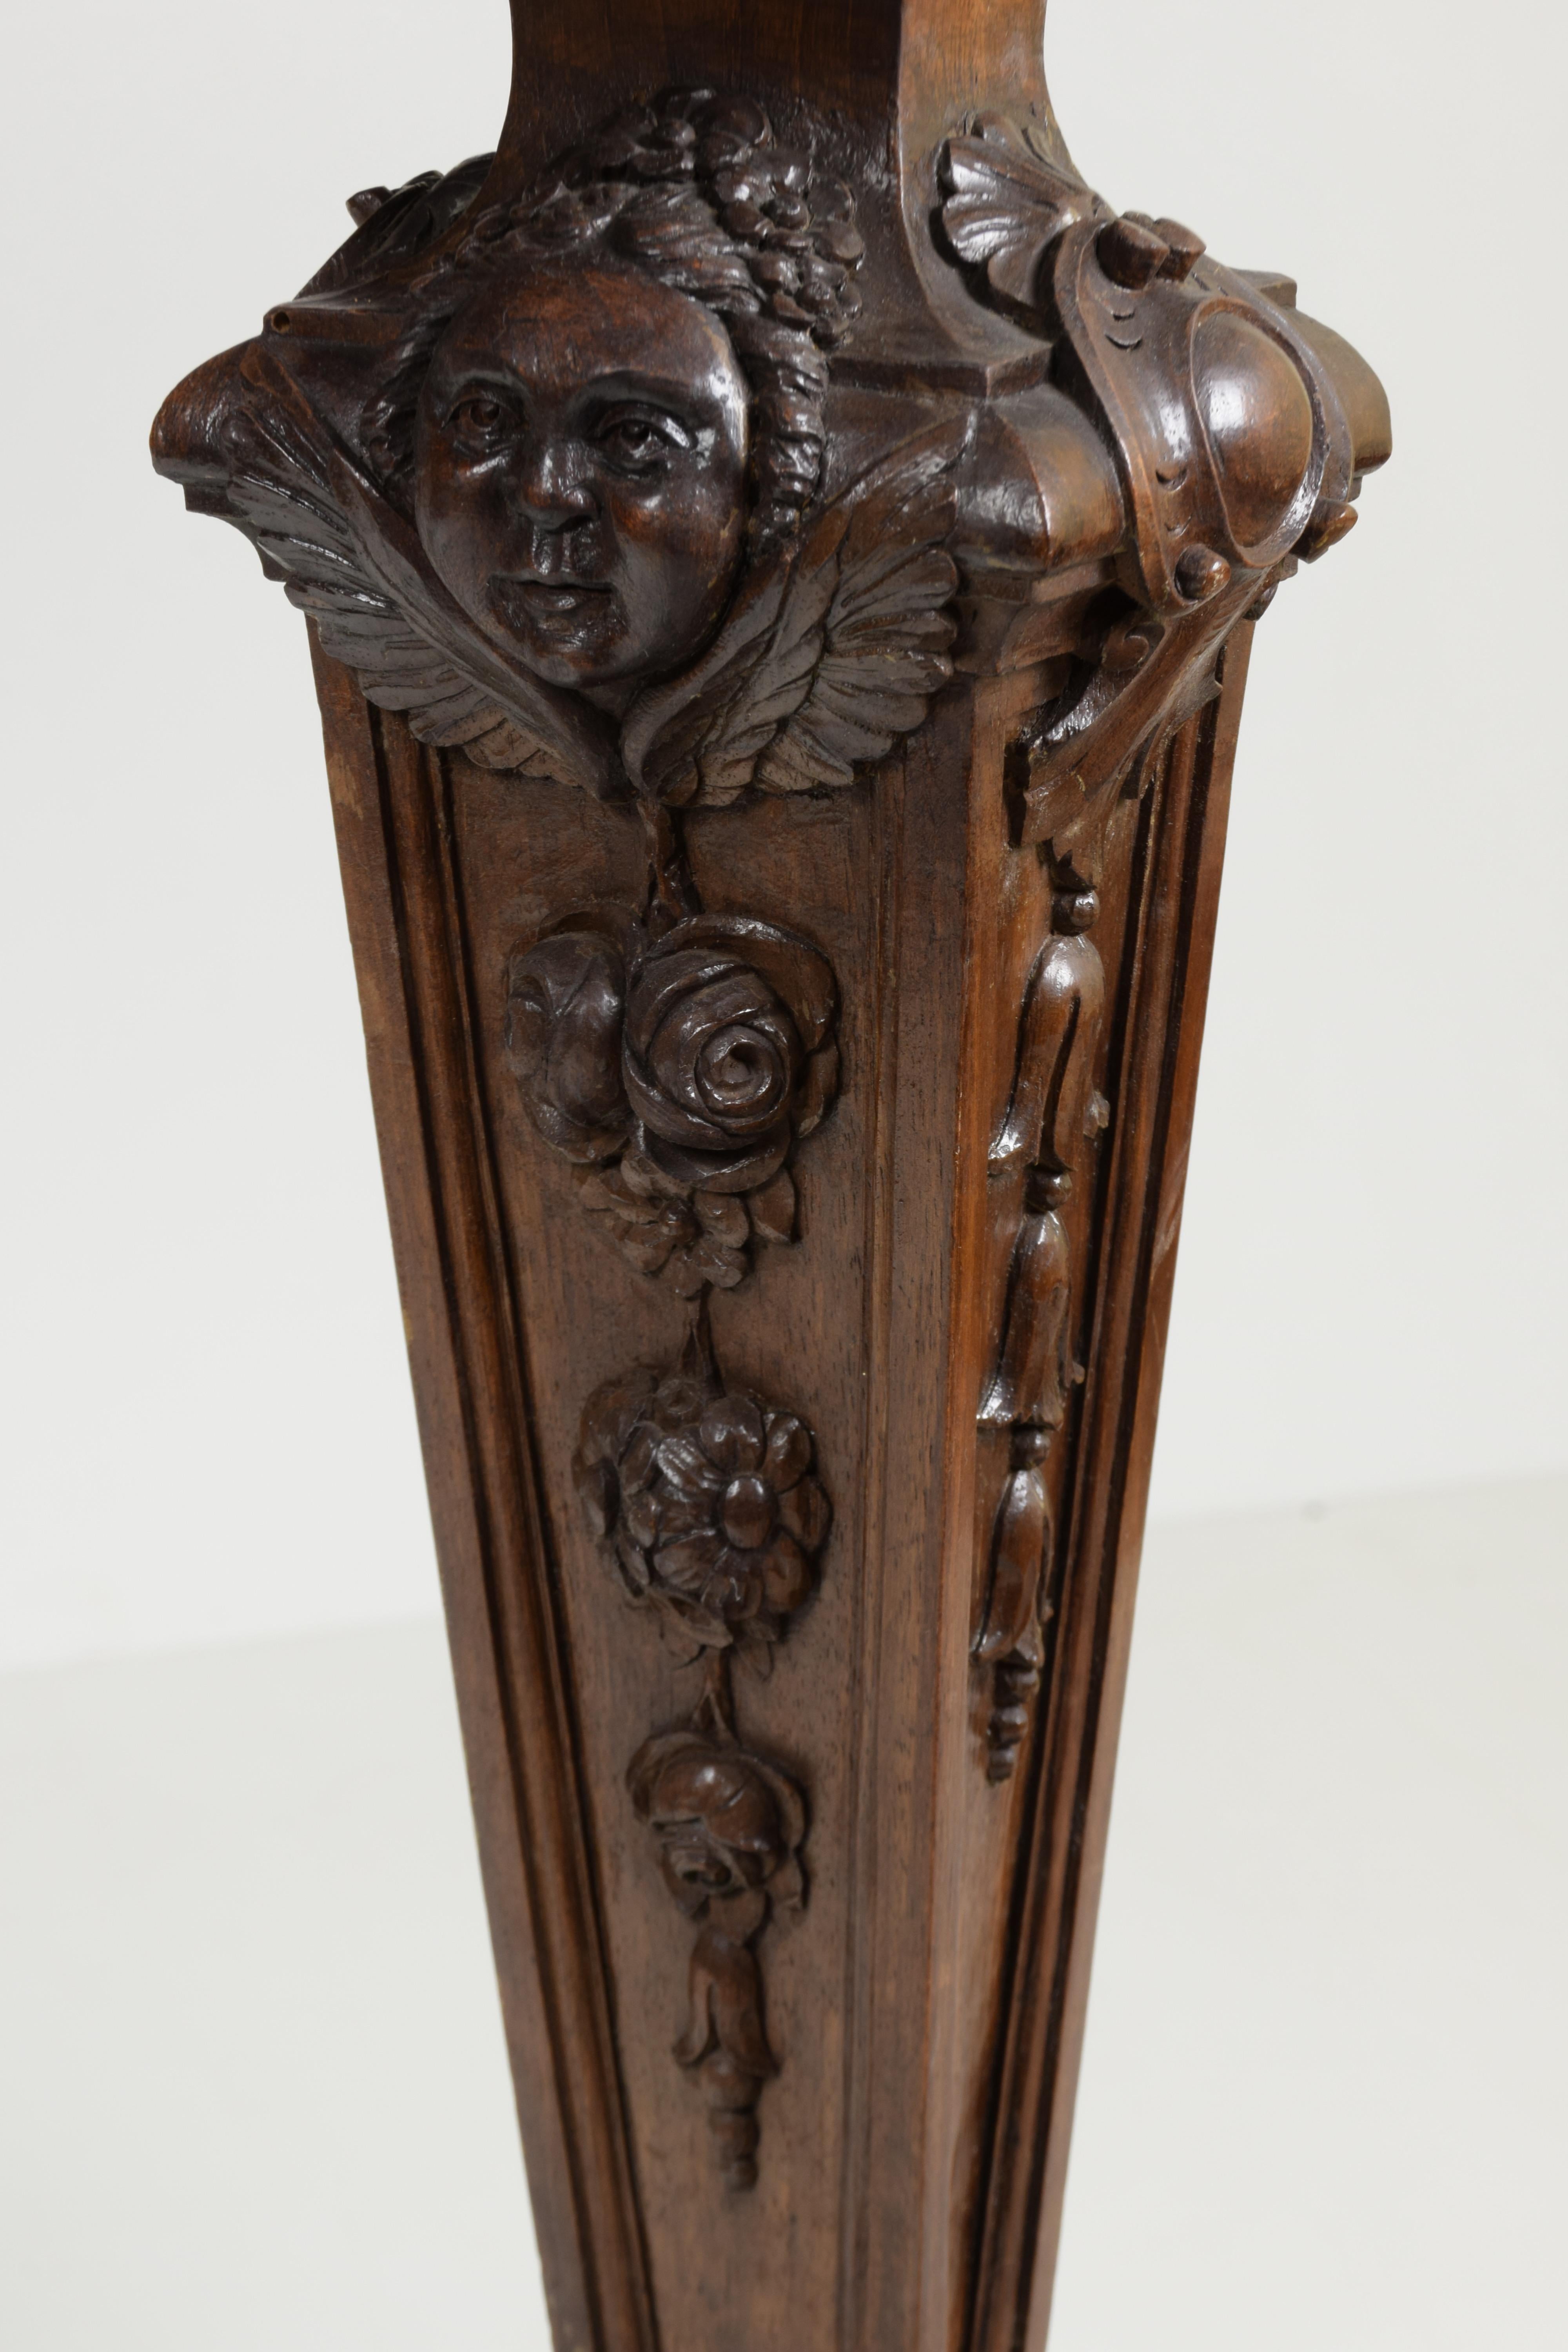 Walnut Dry Bar Cabinet Carved by Hand Depicting the 